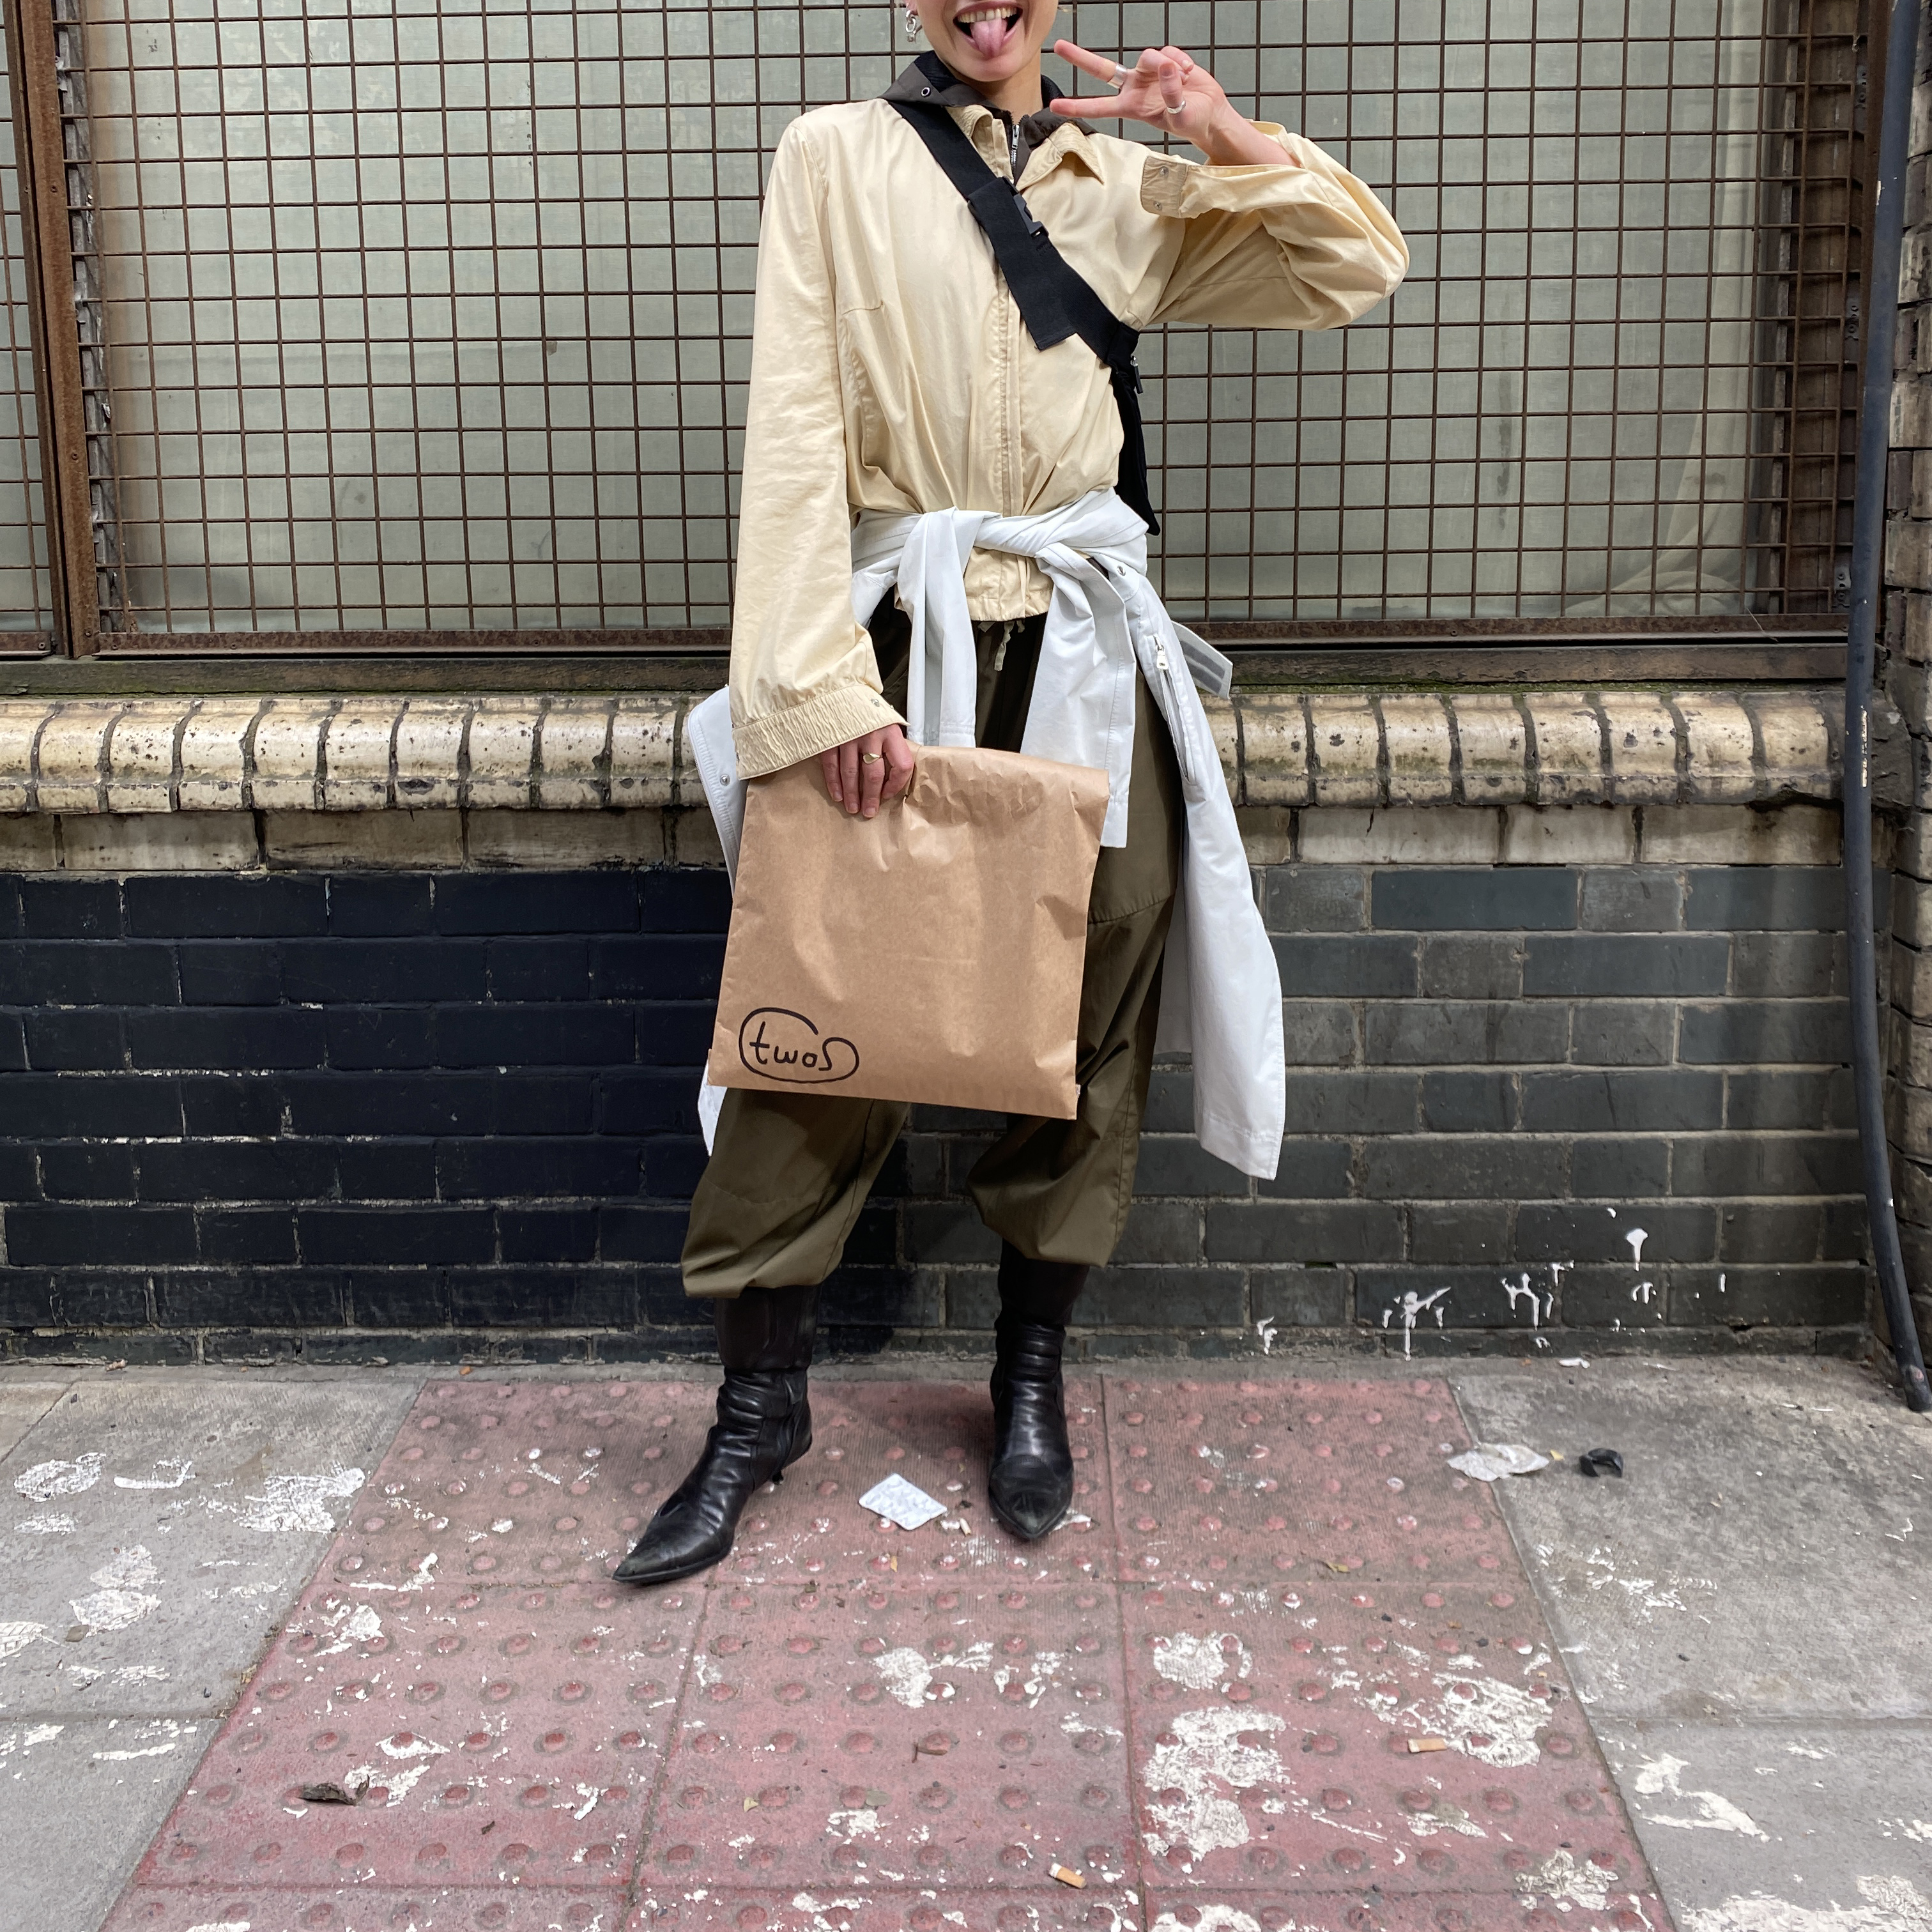 A people holding a brown paper bag 